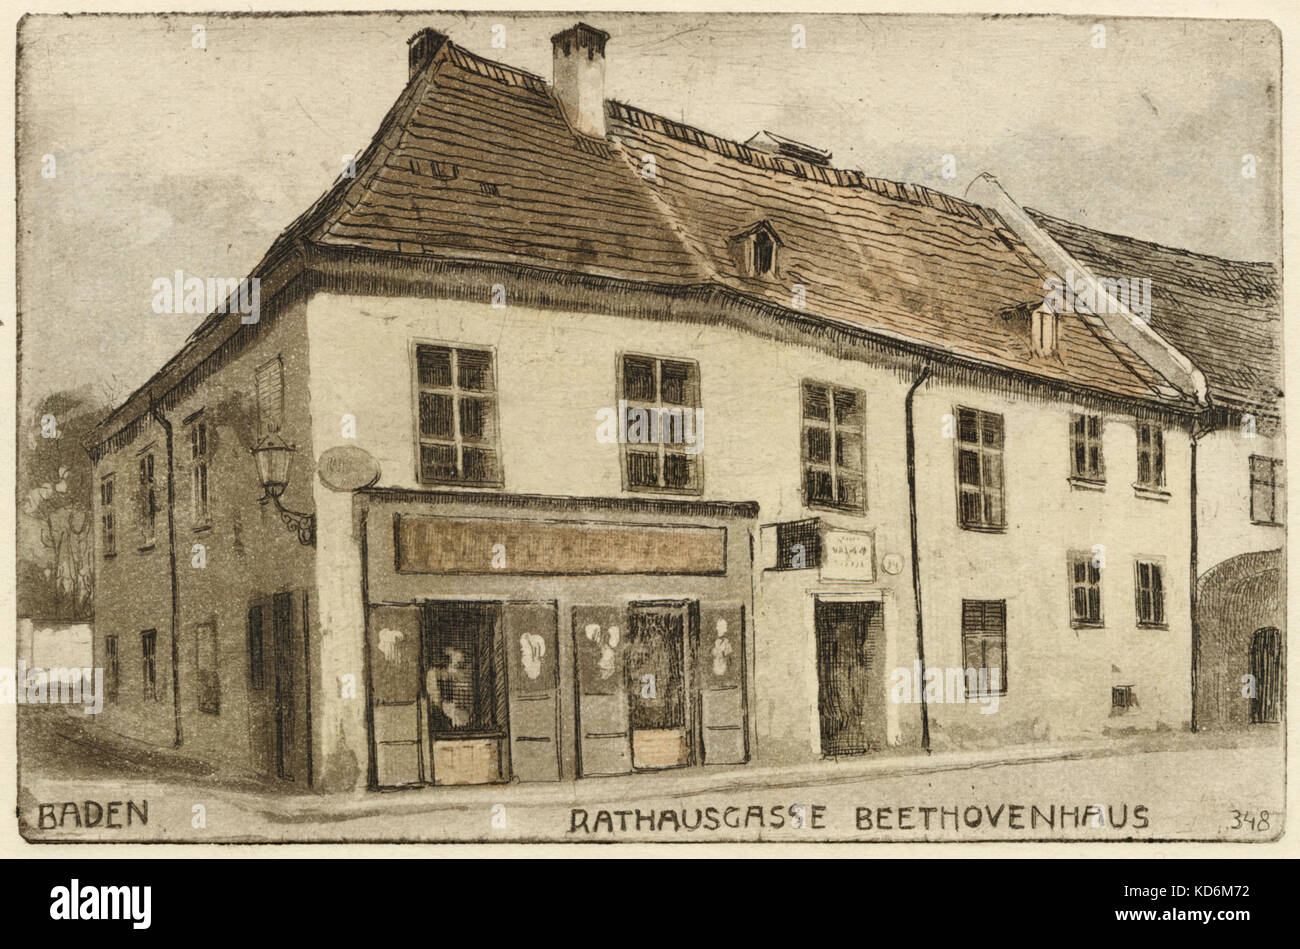 Ludwig van Beethoven 's house in Rathausgasse, Baden. Drawn by L V Pollak. German composer, 17 December 1770 - 26 March 1827. His favourite summer resort town where he stayed for his health during 1803 - 1825.  In 1823 he completed work on the Ninth Symphony at Rathausgasse. Postcard Stock Photo